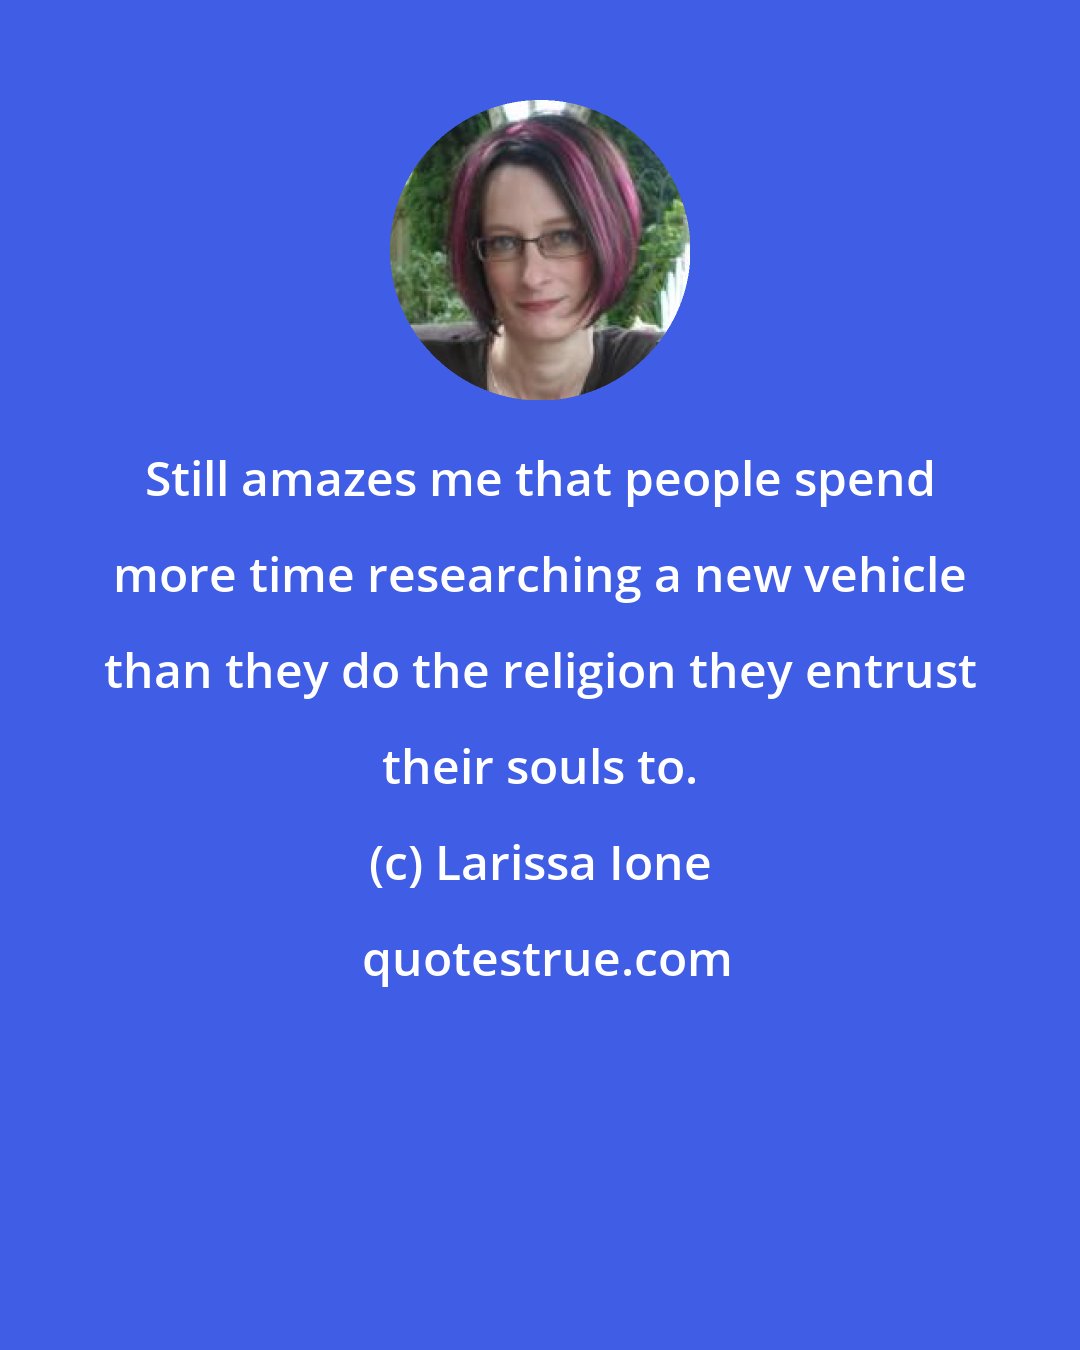 Larissa Ione: Still amazes me that people spend more time researching a new vehicle than they do the religion they entrust their souls to.